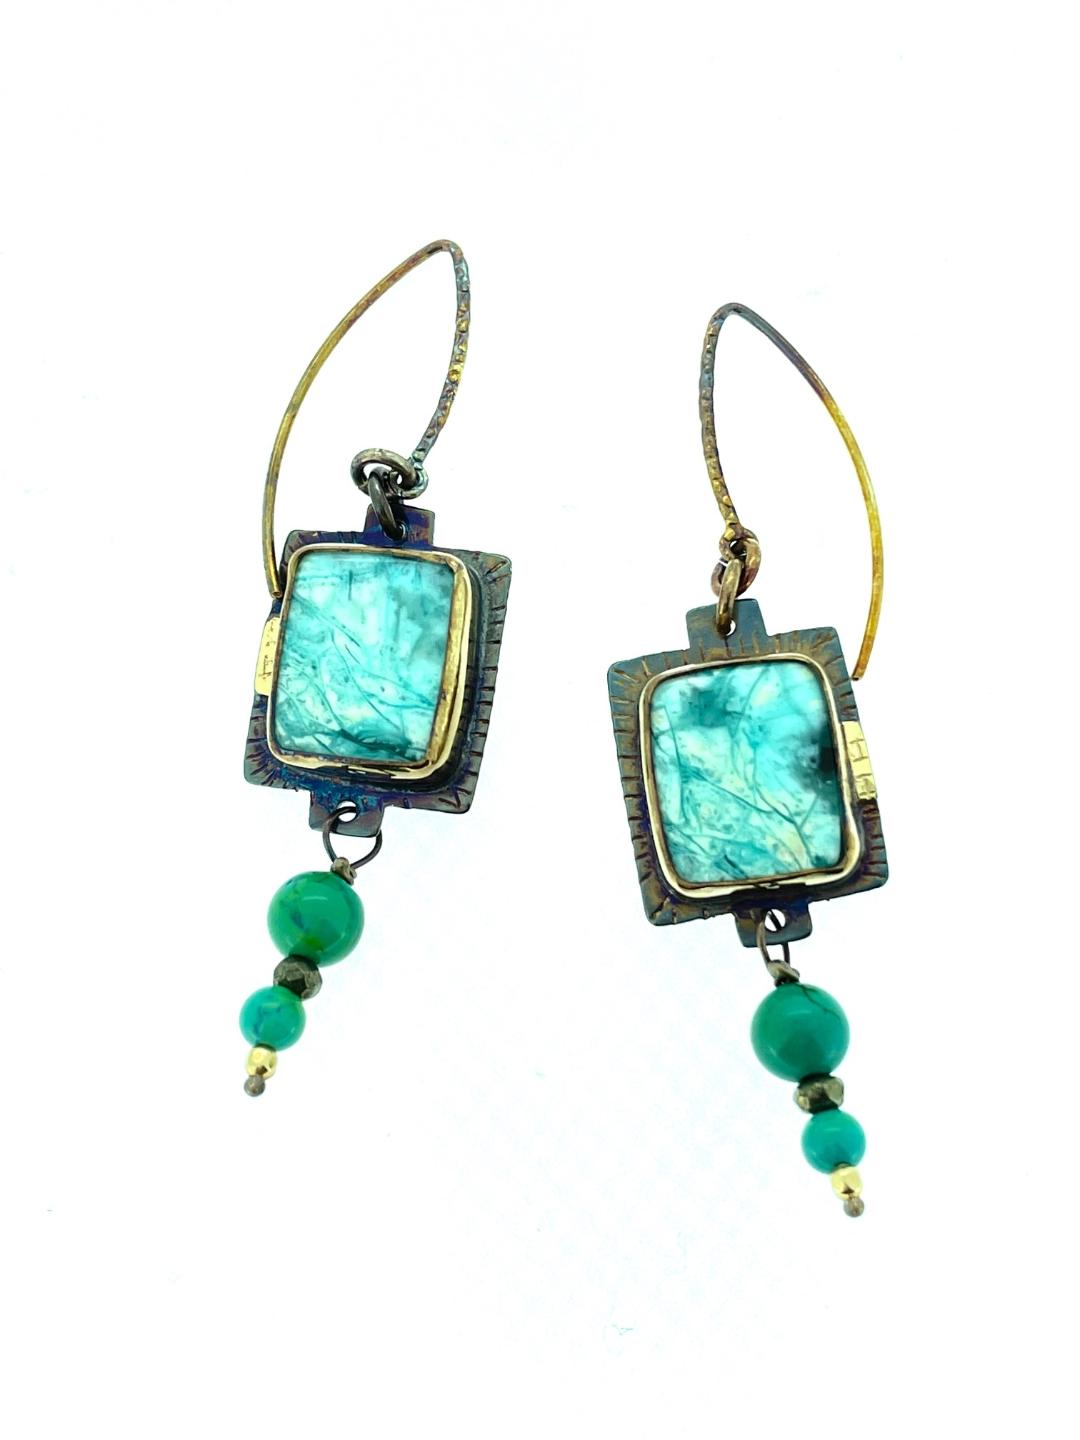 Blue Opal Petrified Wood with Turquoise Beads Earrings in 18k Gold